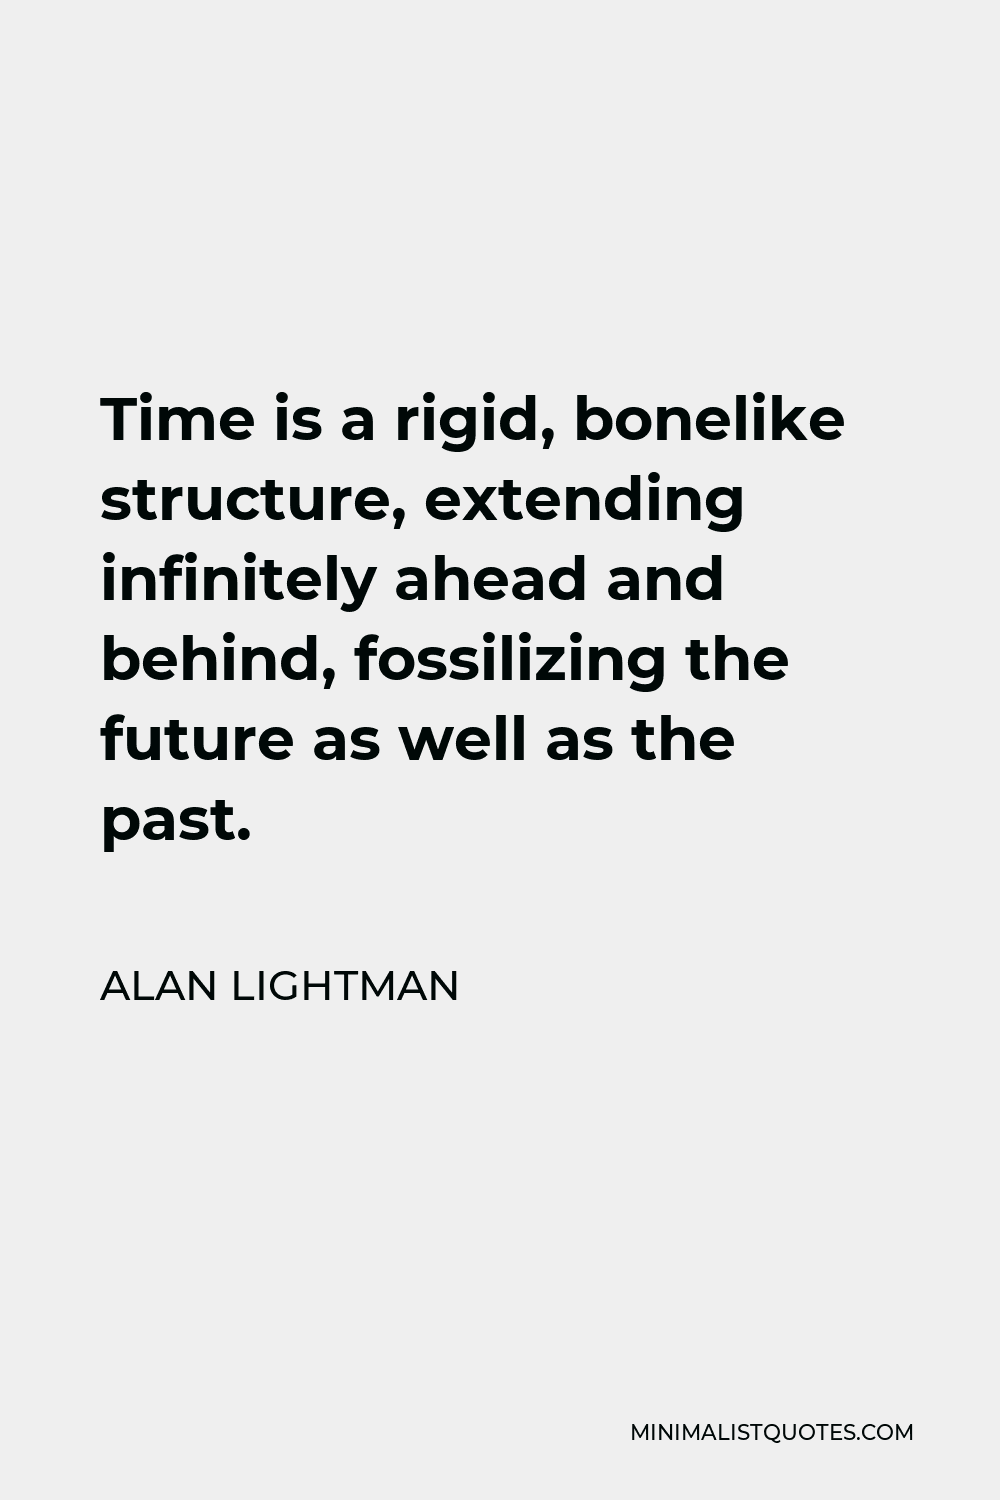 Alan Lightman Quote - Time is a rigid, bonelike structure, extending infinitely ahead and behind, fossilizing the future as well as the past.